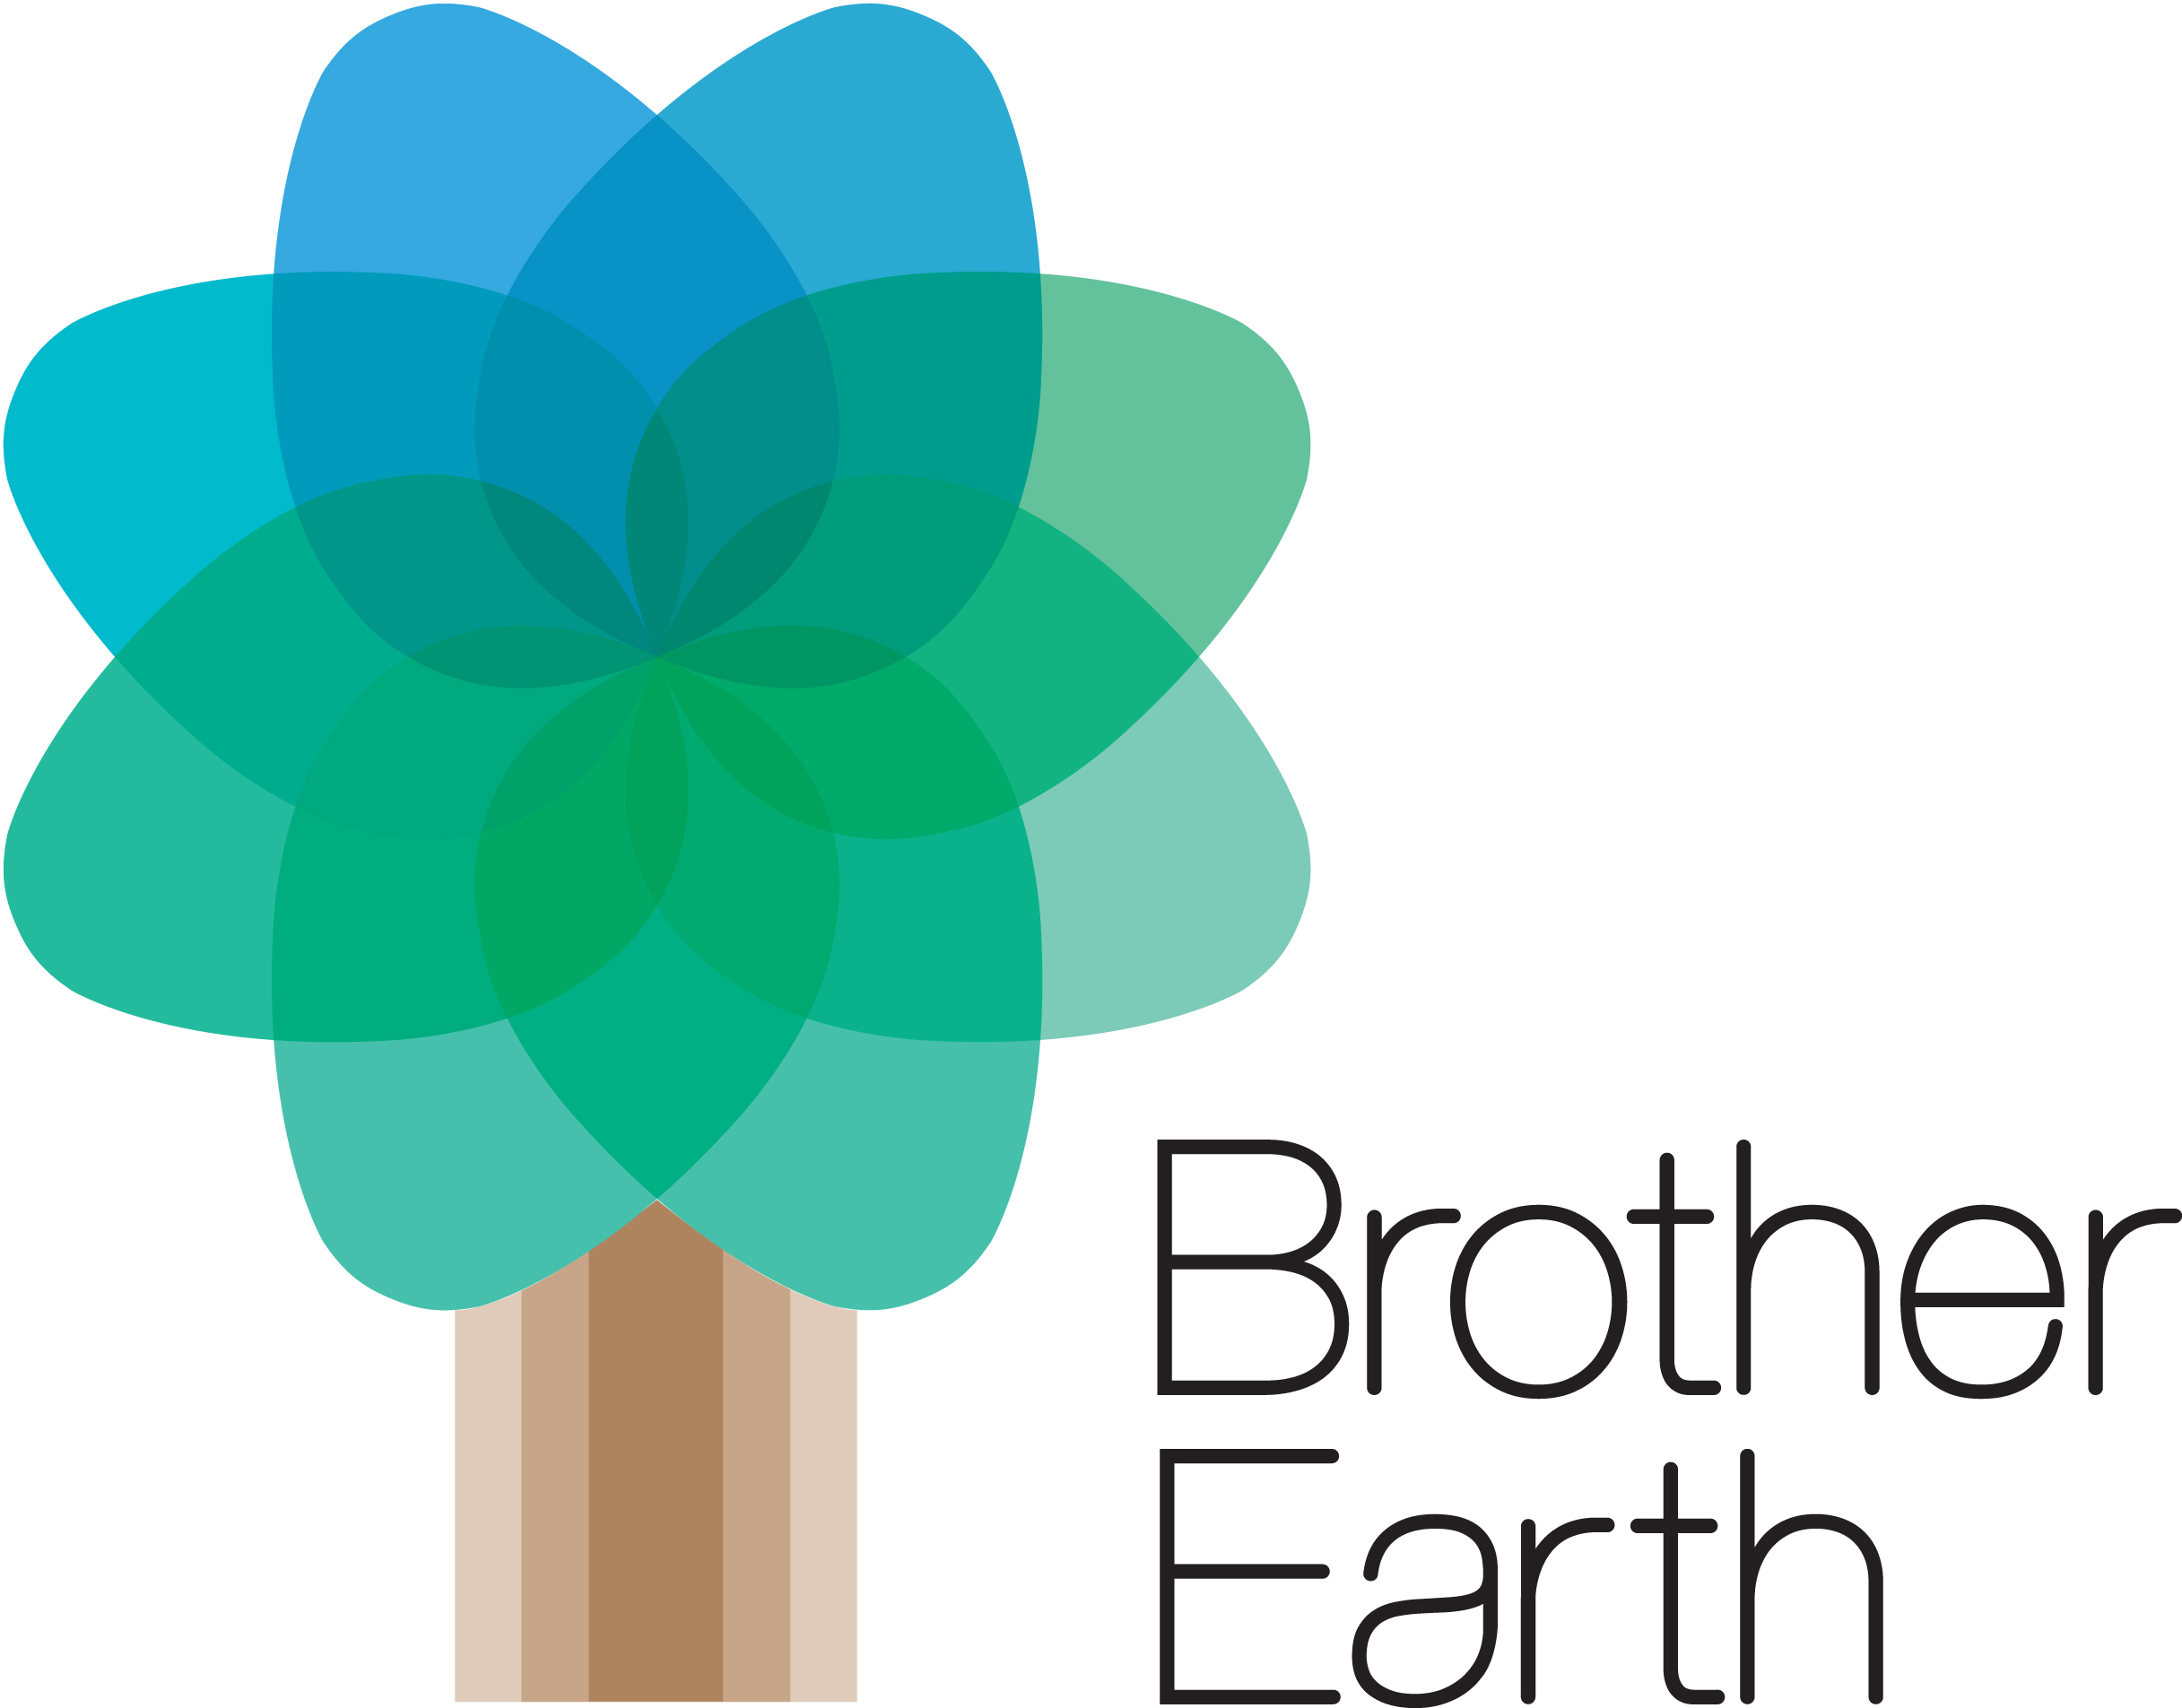 Brother earth logo